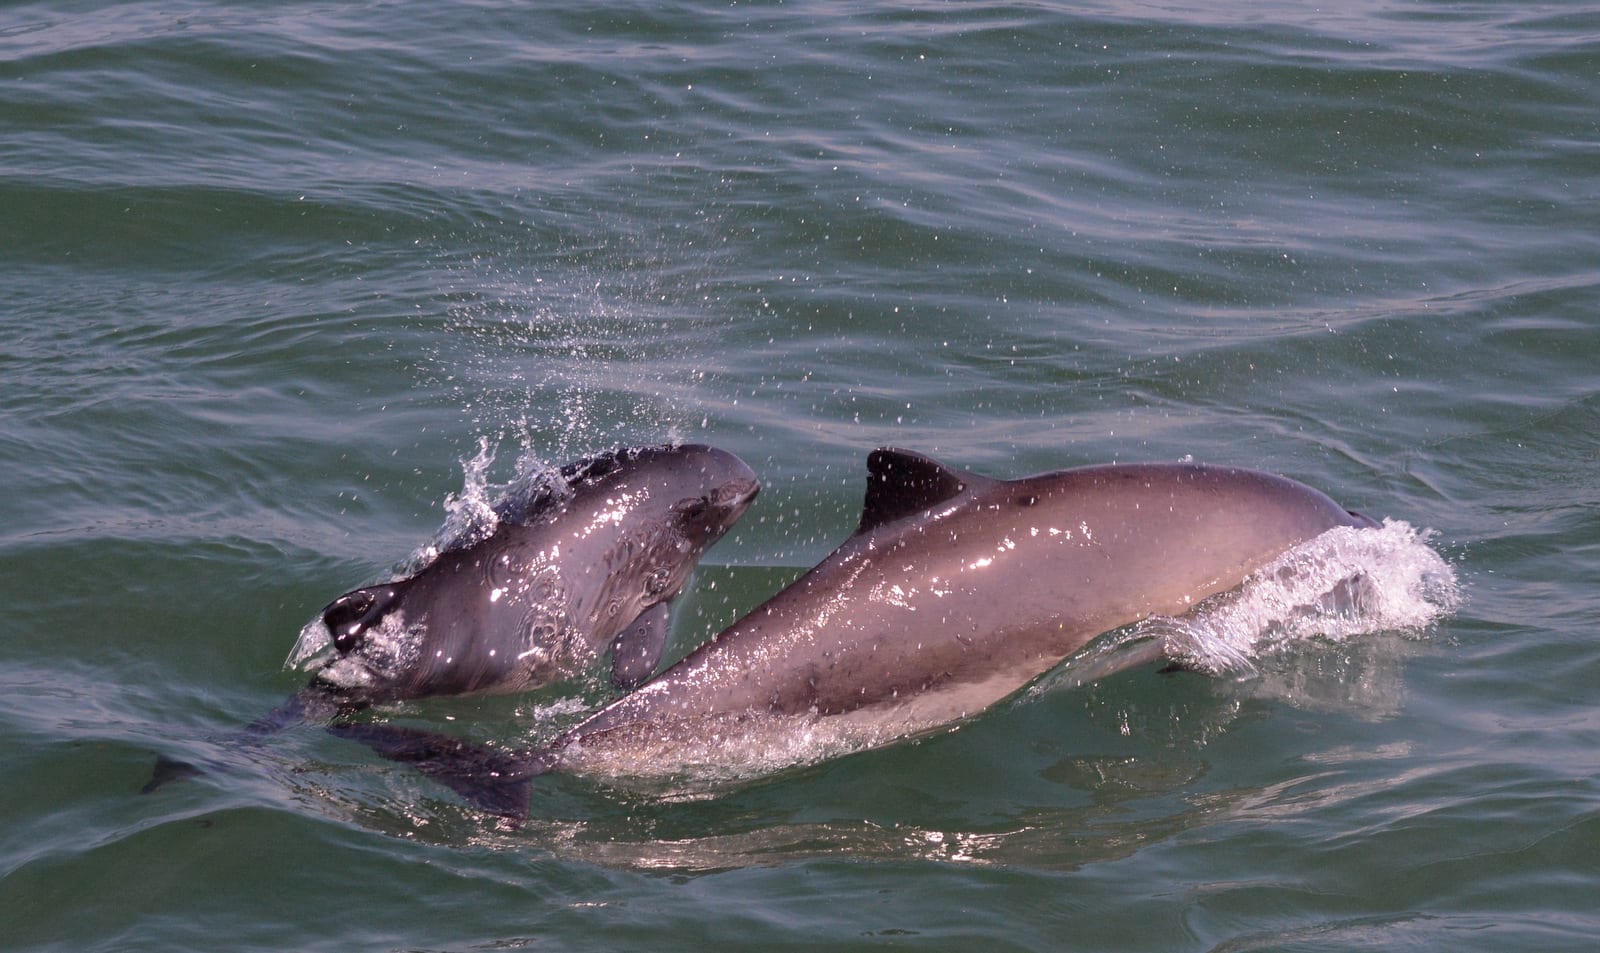 harbour porpoise mom and calf pair 